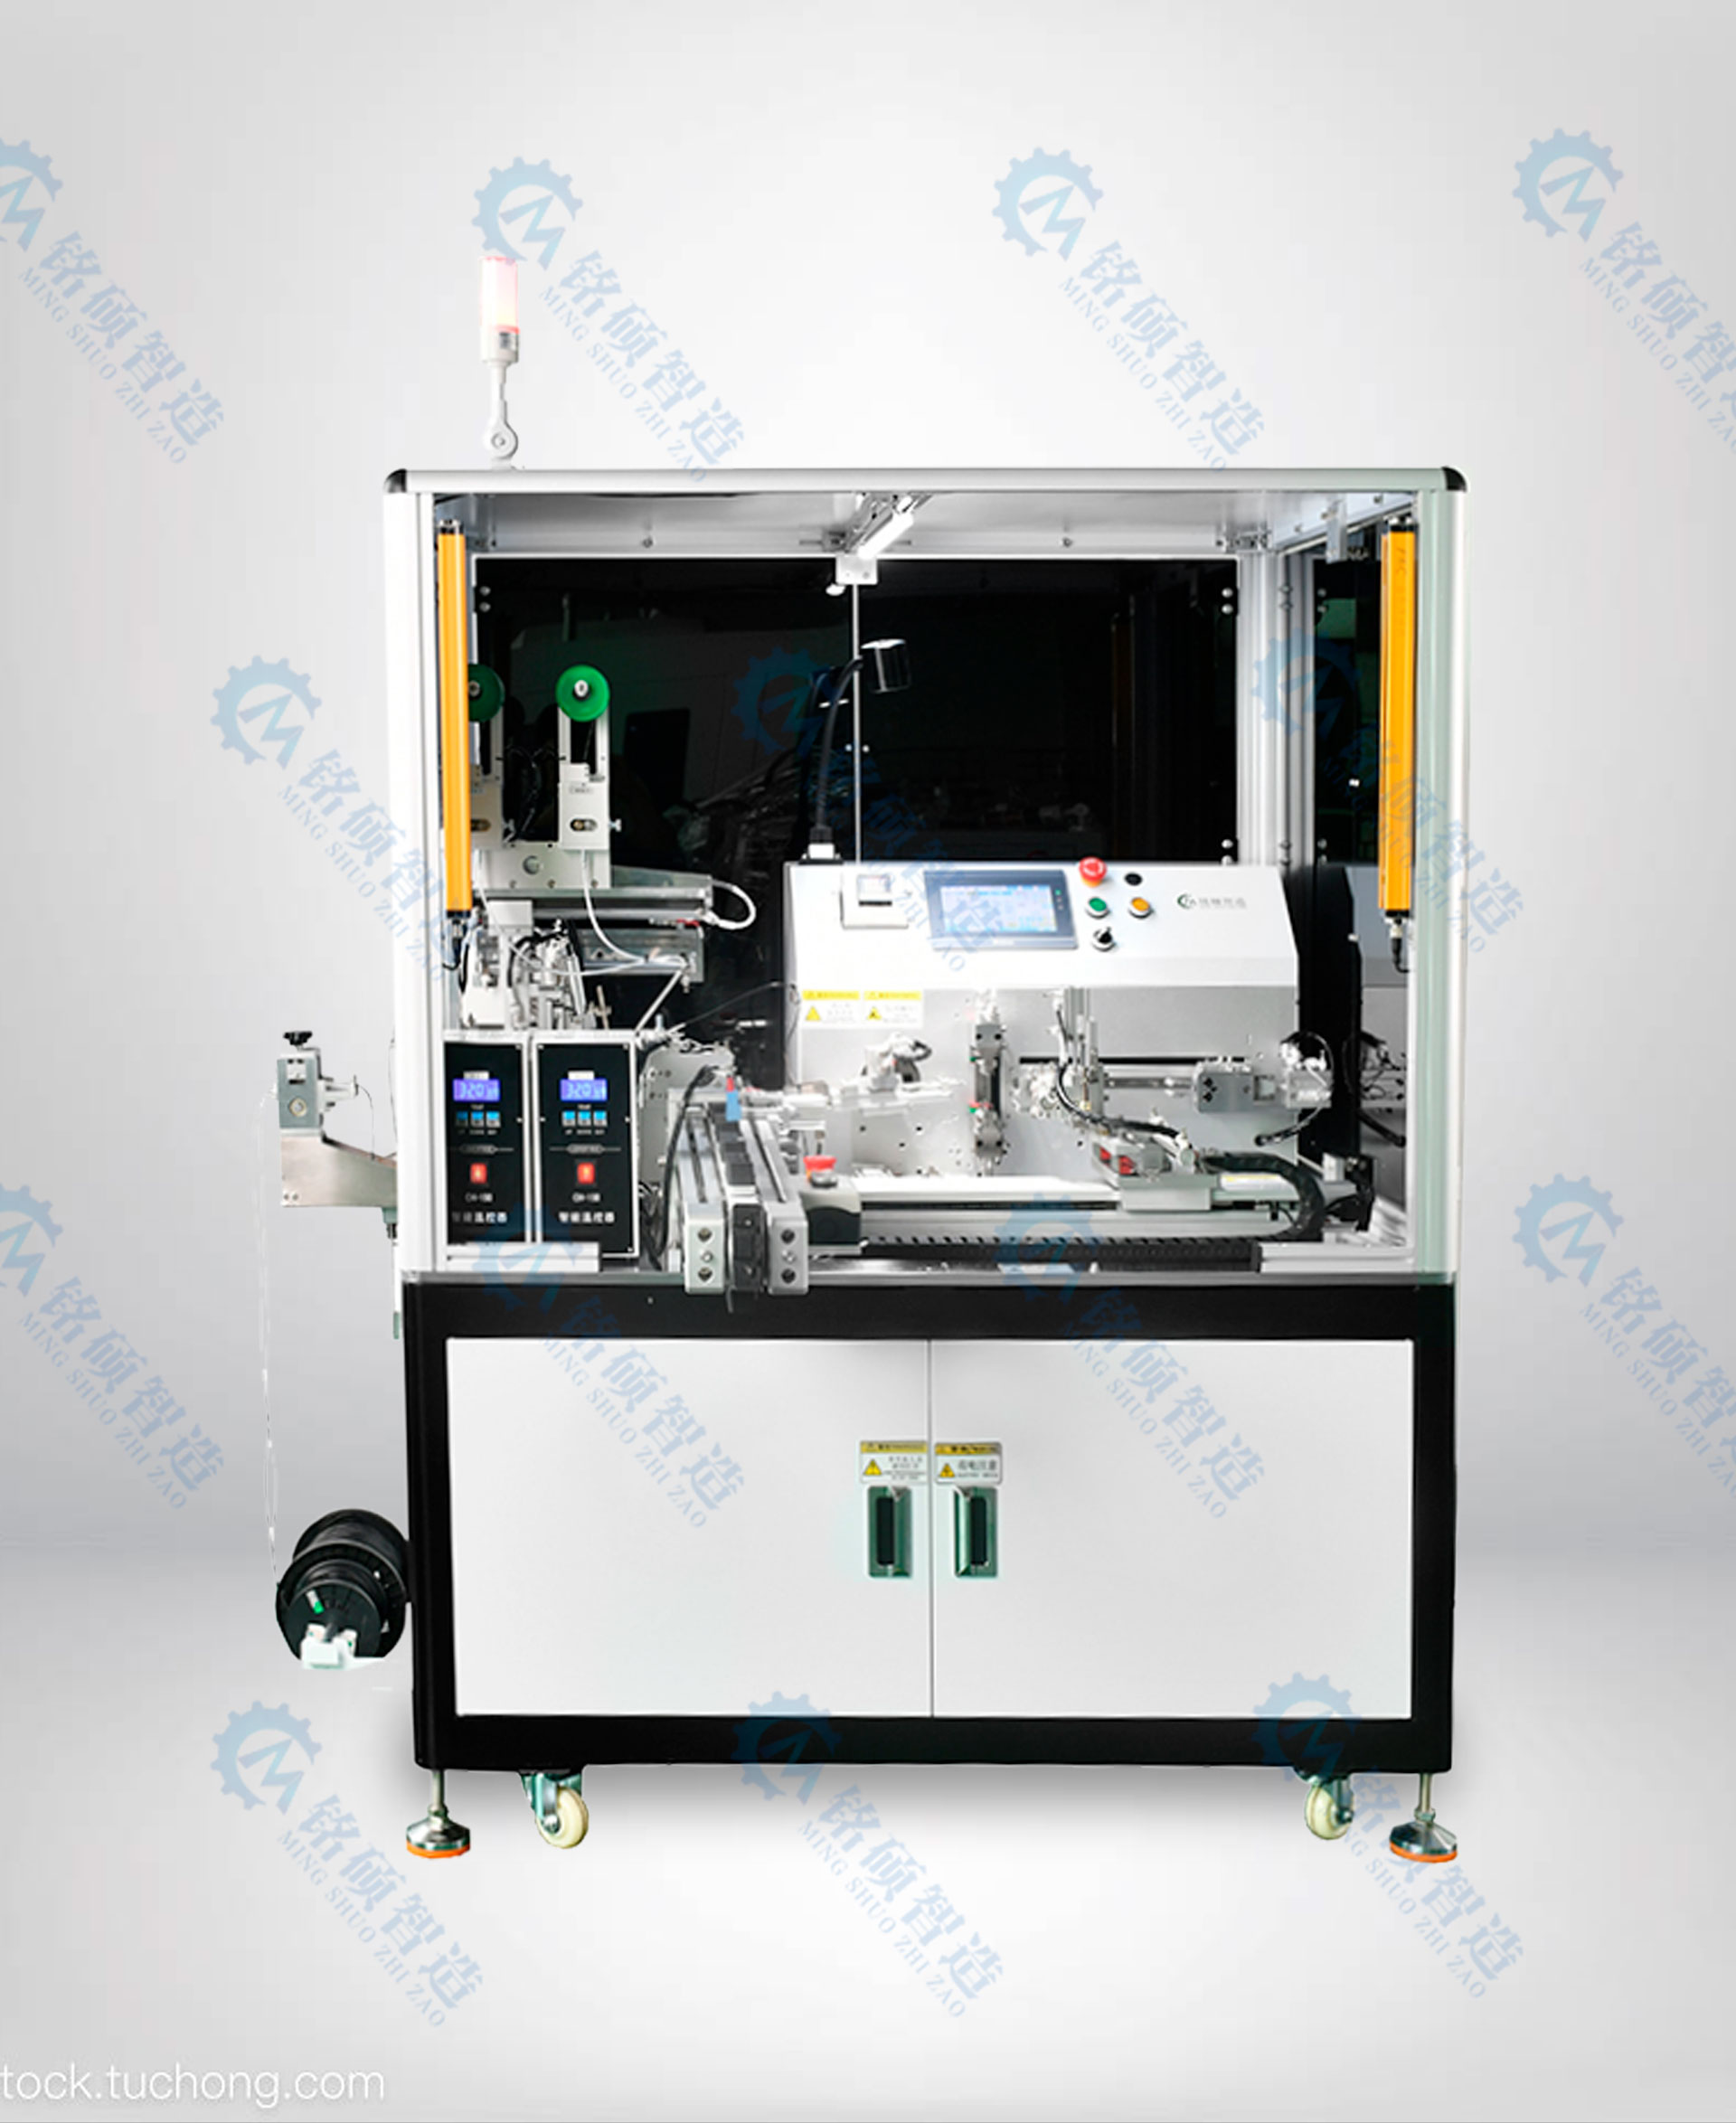 Why choose automatic wire sodering machine?